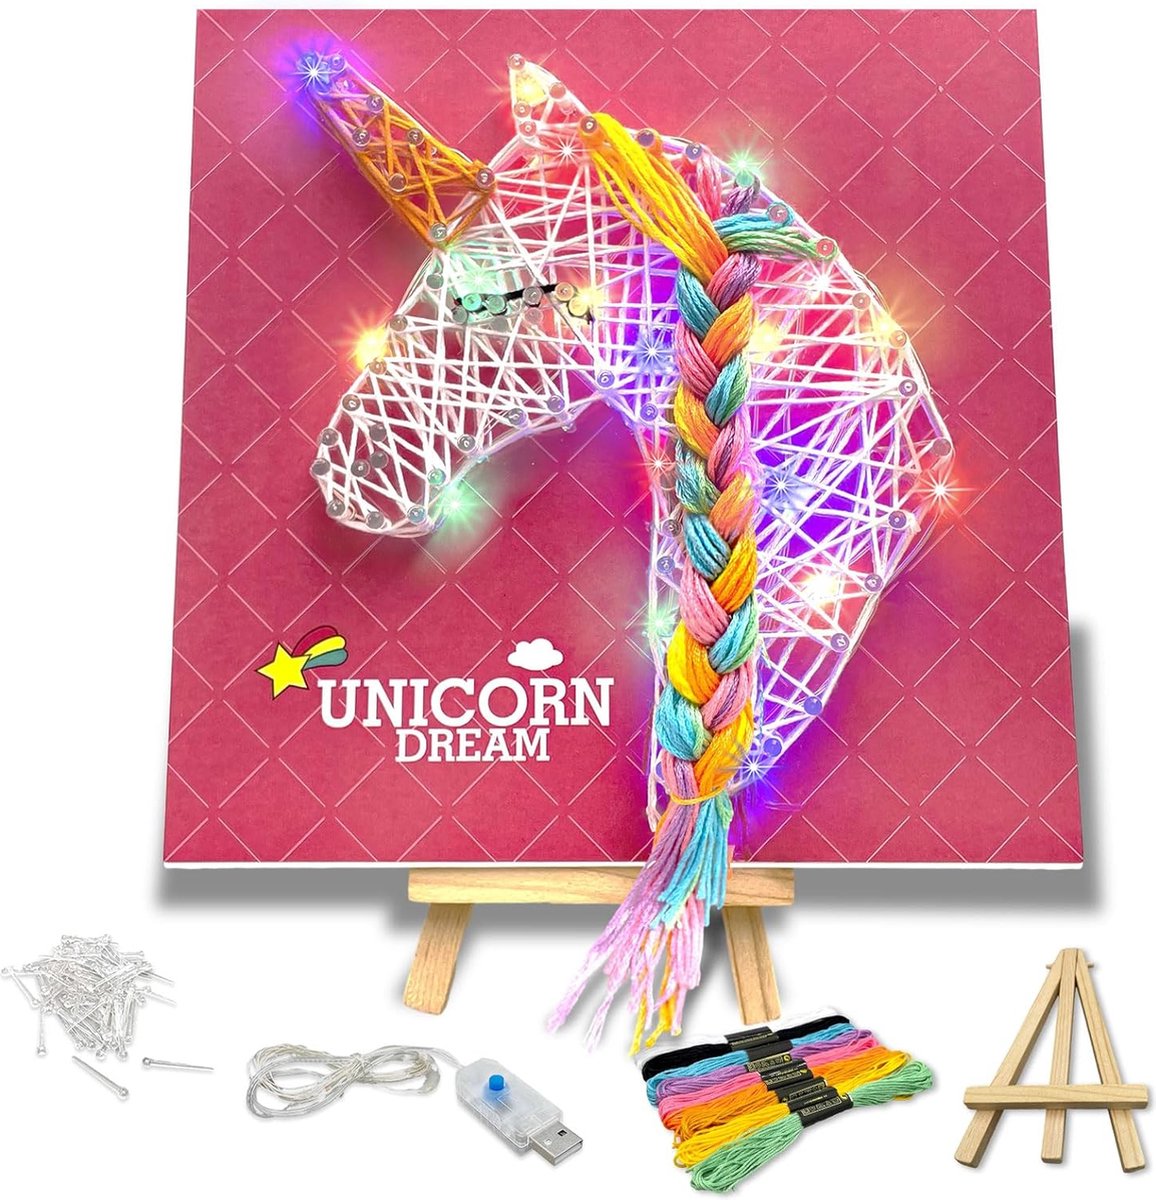  3D String Art Kit for Kids - 63 Pcs Birthday Gifts for Kids  with 30 Multi-Colored LED Bulbs & 6 Balloons - Crafts for Girls and Boys  Ages 6-12 - DIY